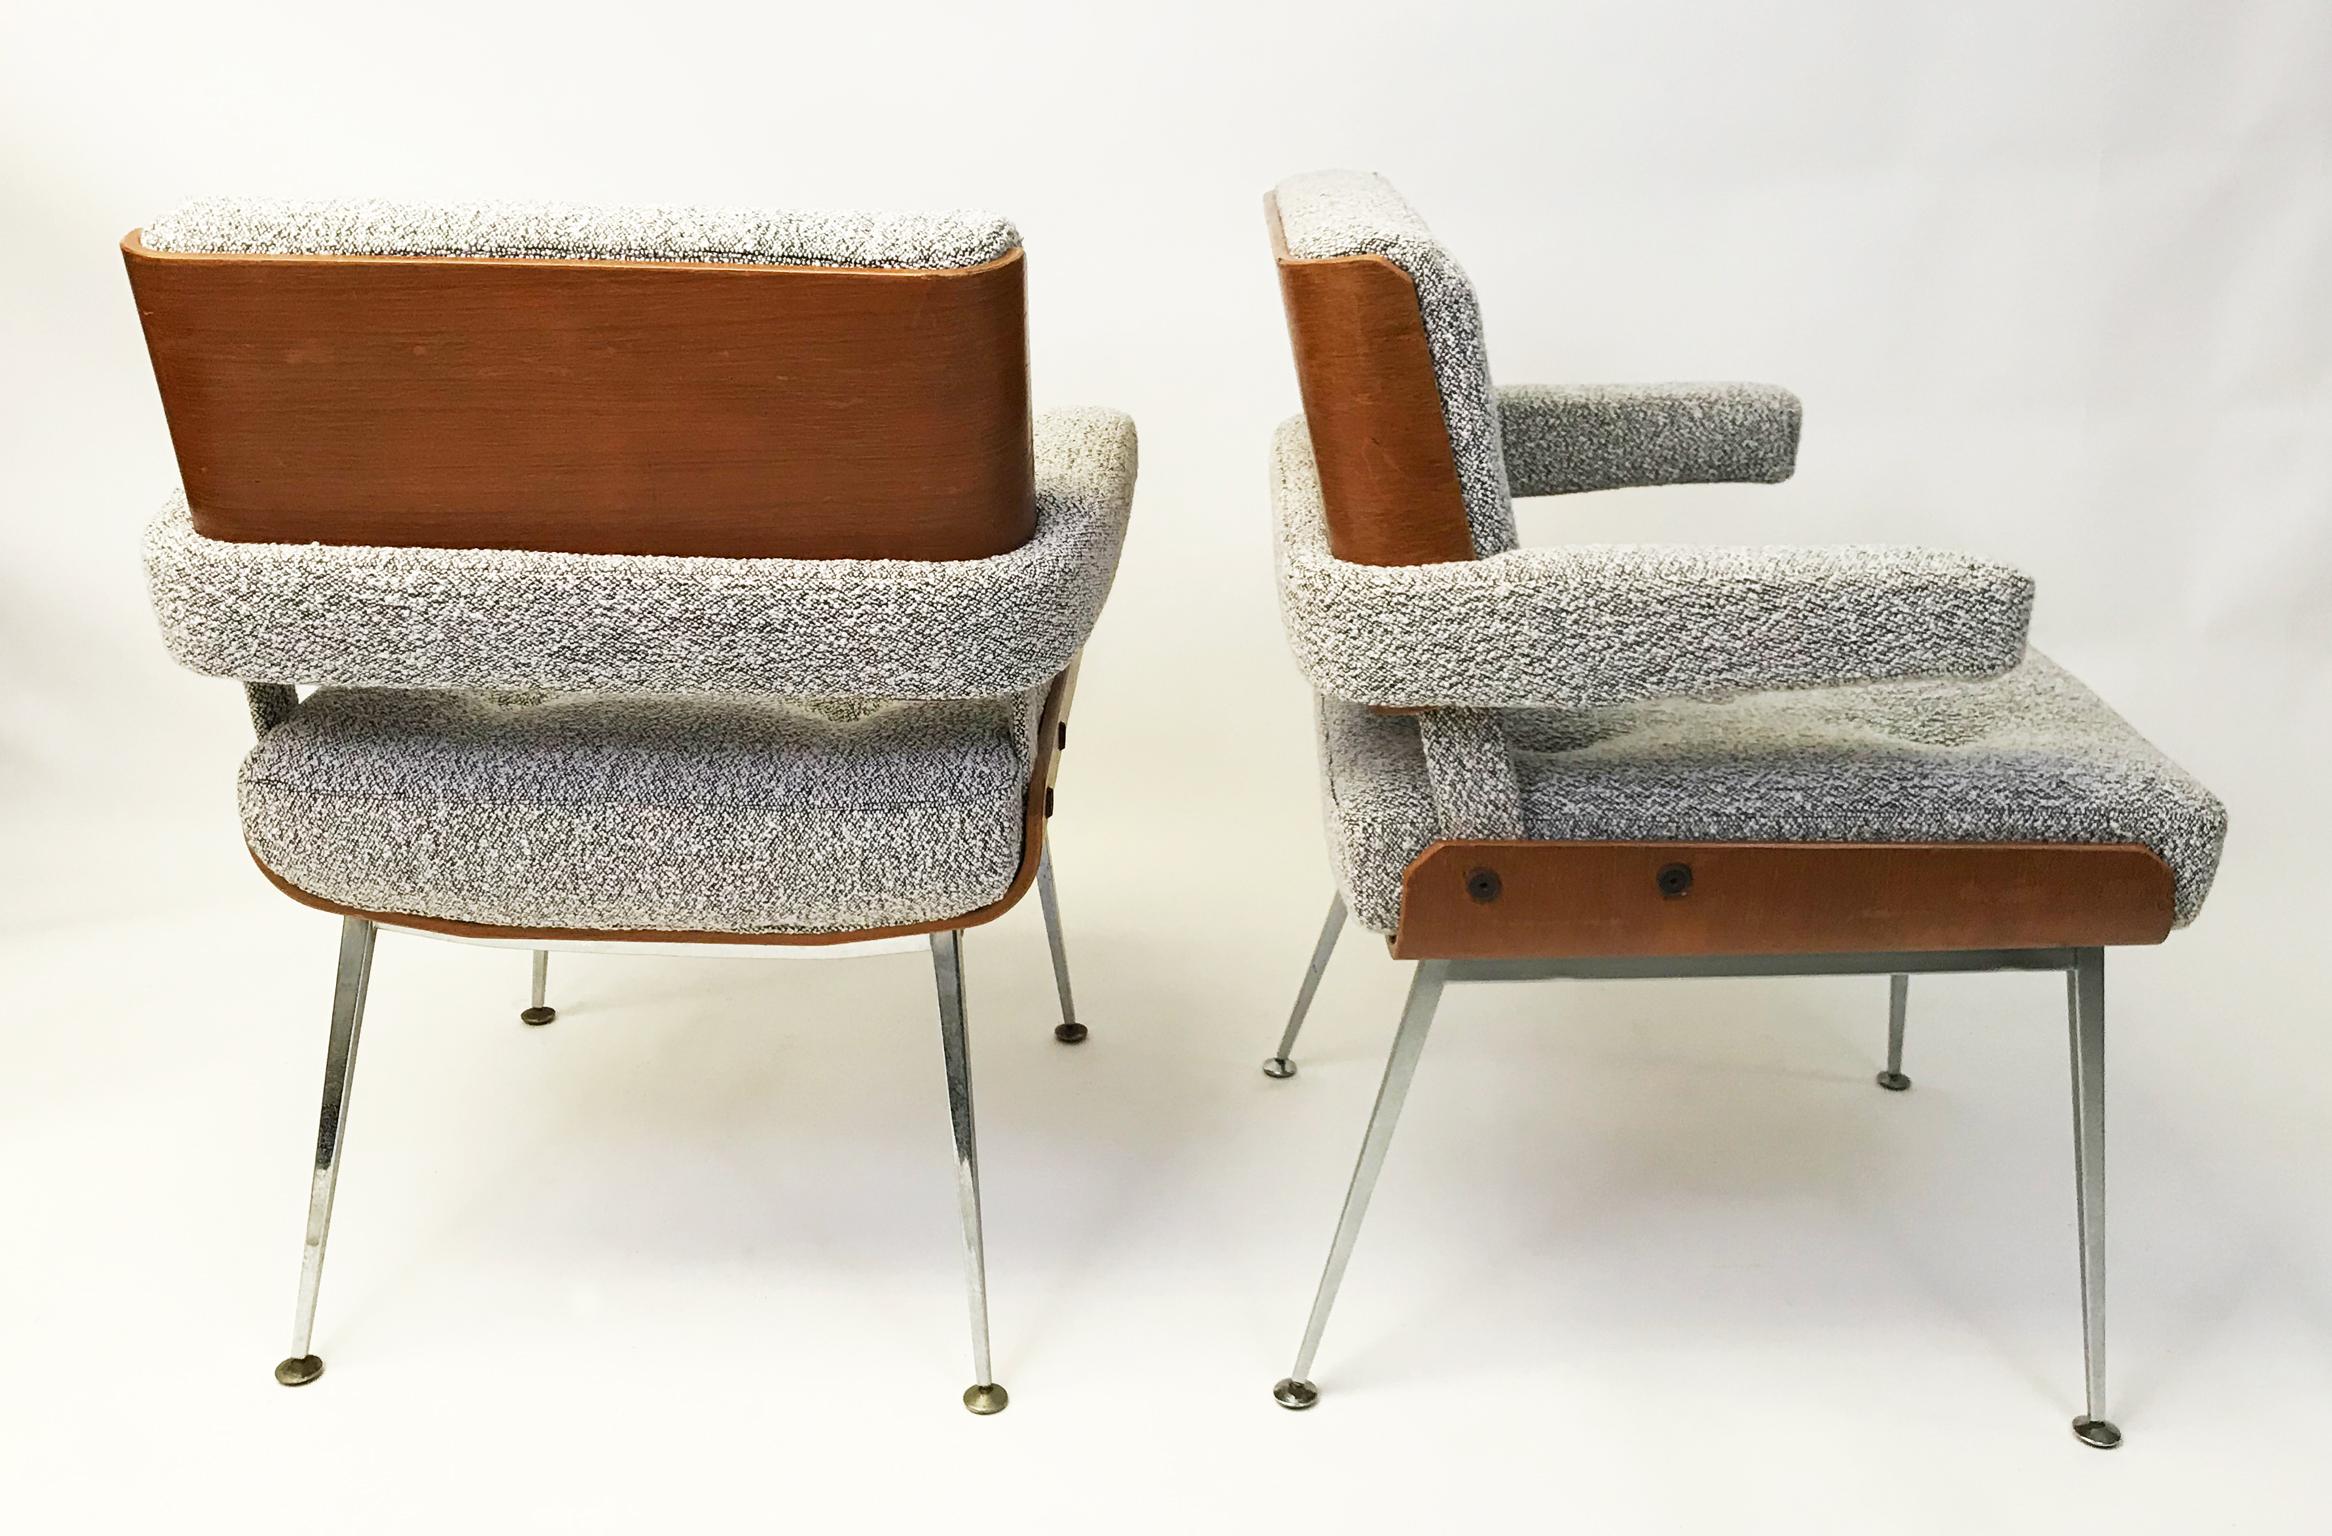 Pair of Alain Richard armchairs Mid-Century Modern, France

Pair of bentwood and chrome leg armchairs of exceptional style. 
Designed by Alain Richard in France, circa 1959. These are originals - not a re-issue. New upholstery in soft bouclé wool